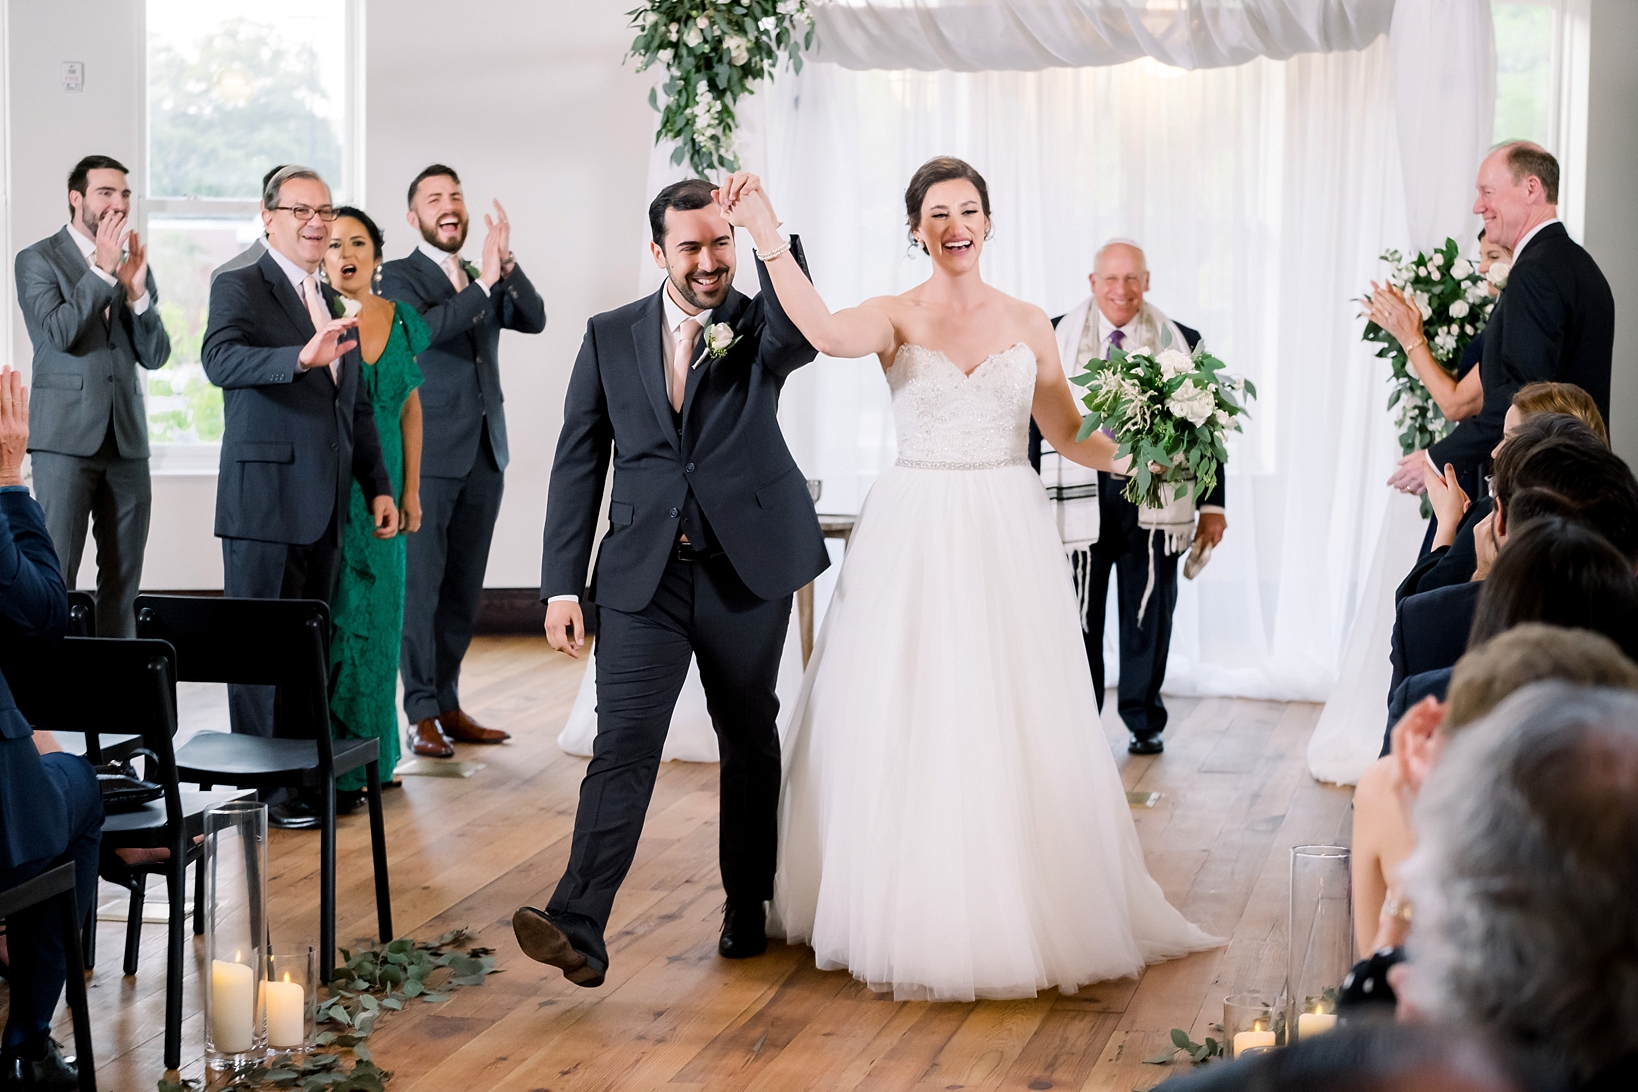 Husband and Wife walk back up the aisle on their wedding day surrounded by family and friends